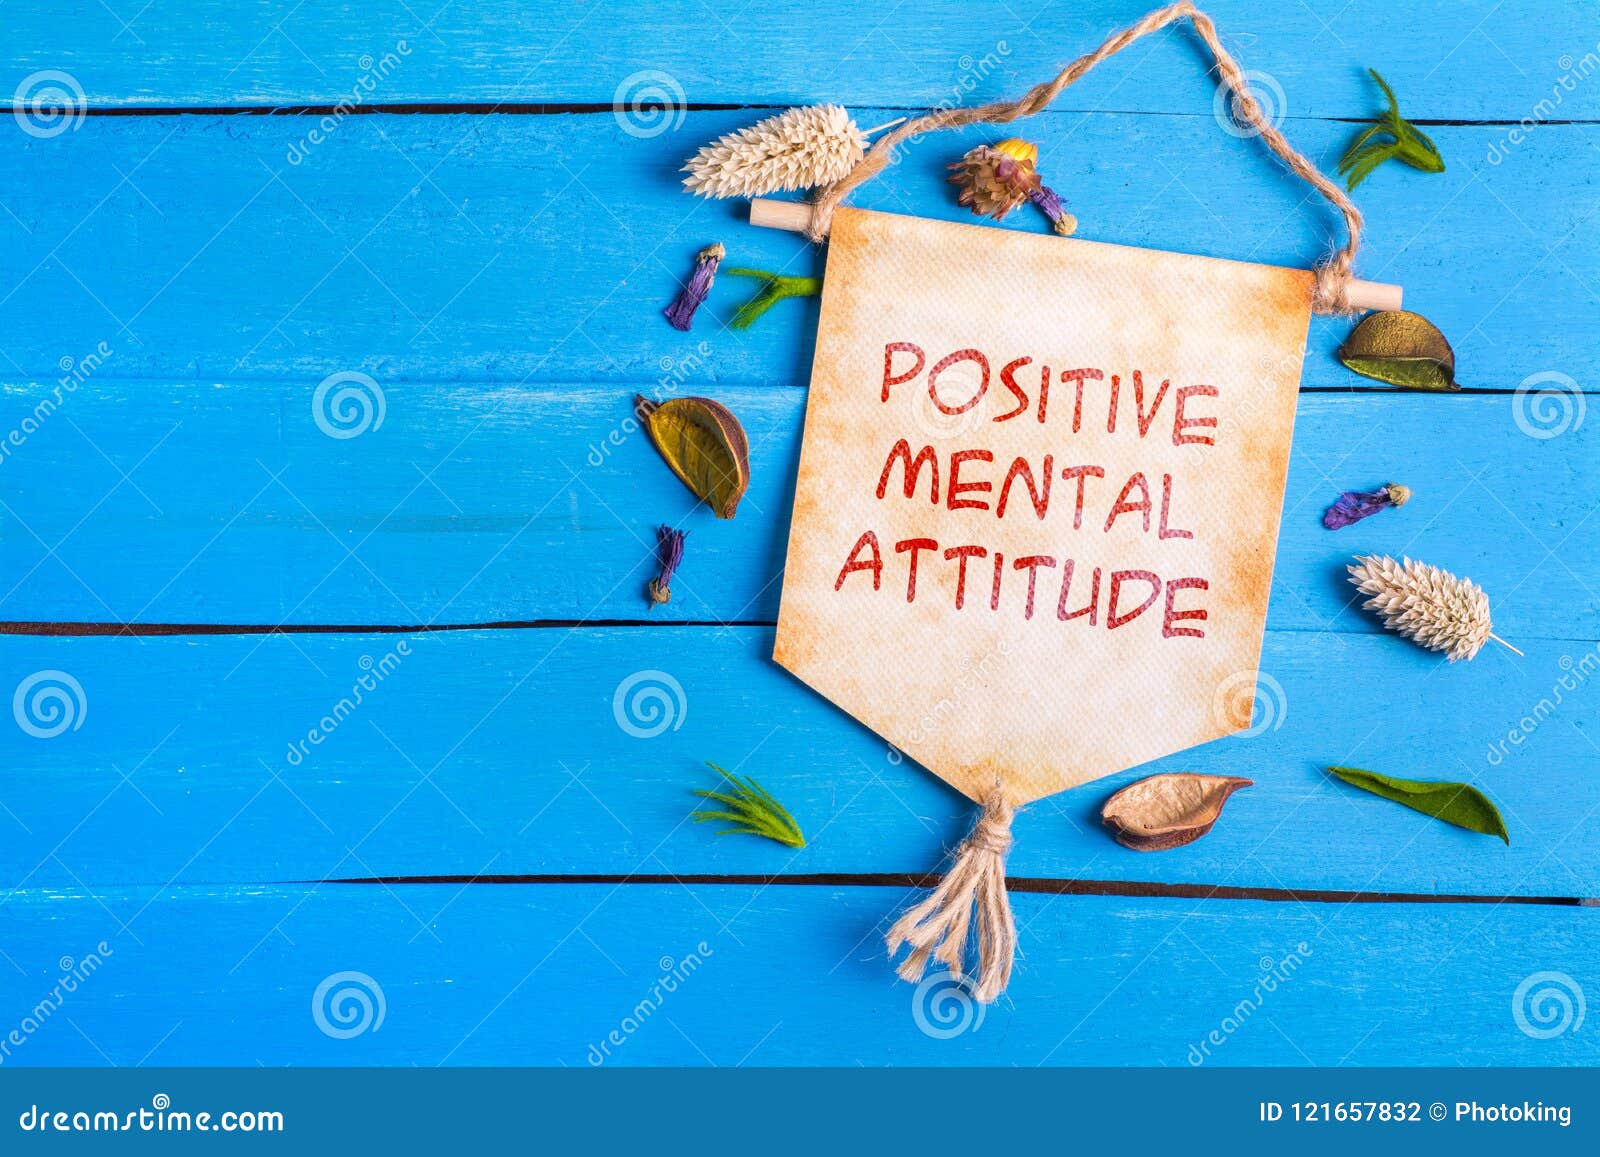 positive mental attitude text on paper scroll